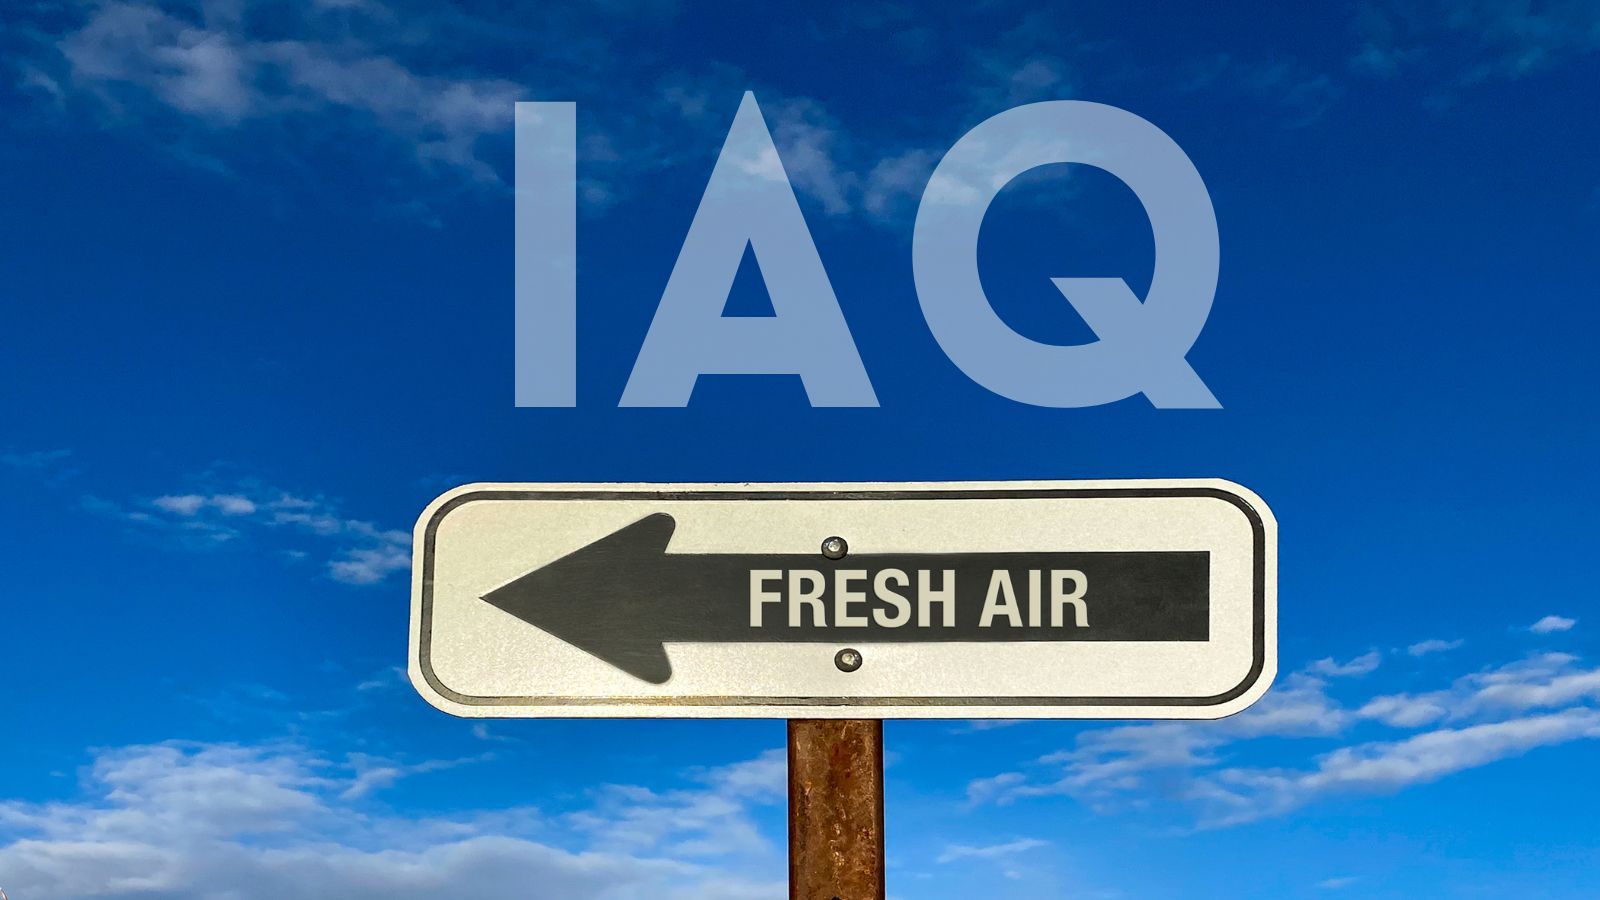 sign that says 'fresh air' with 'IAQ' above it